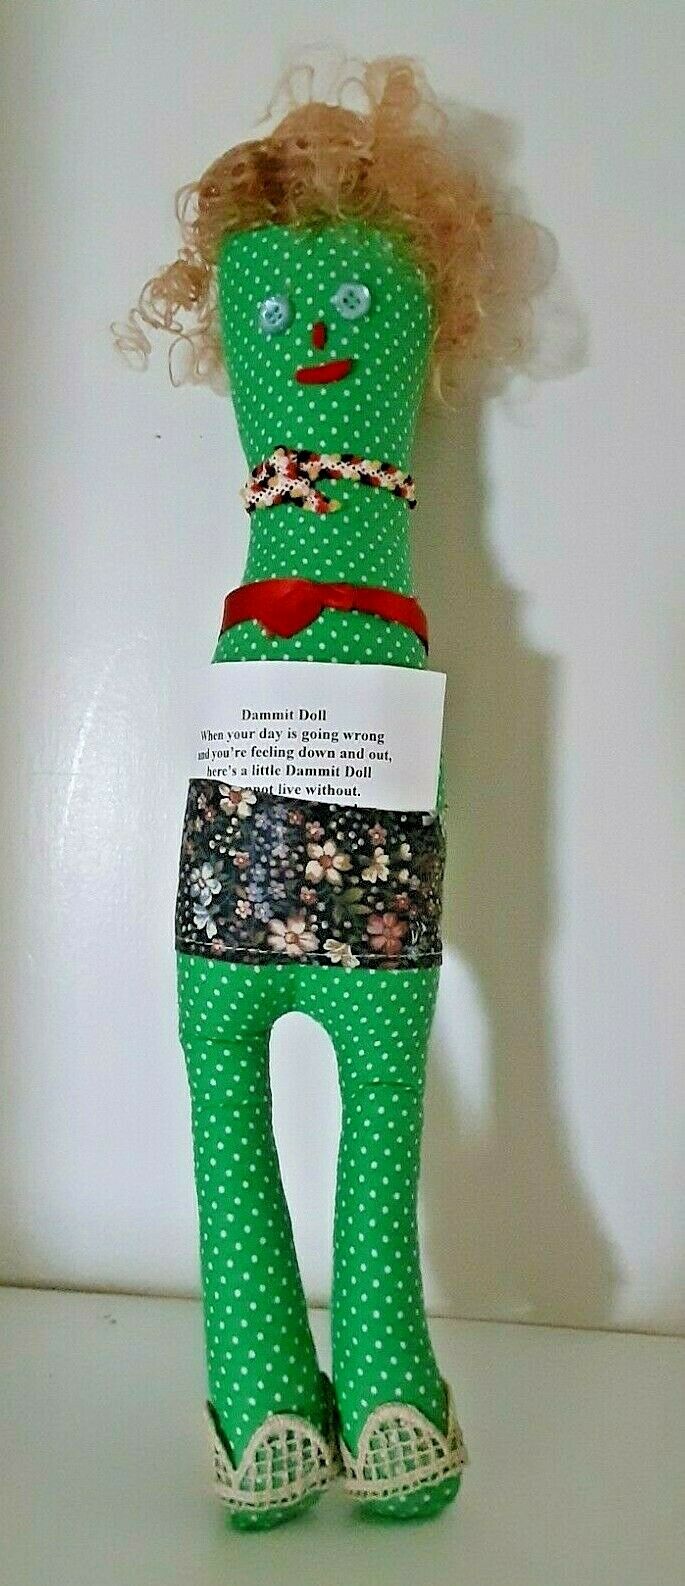 Dammit Doll Green With White Polka Dots Curly Blond Hair Straw Hat